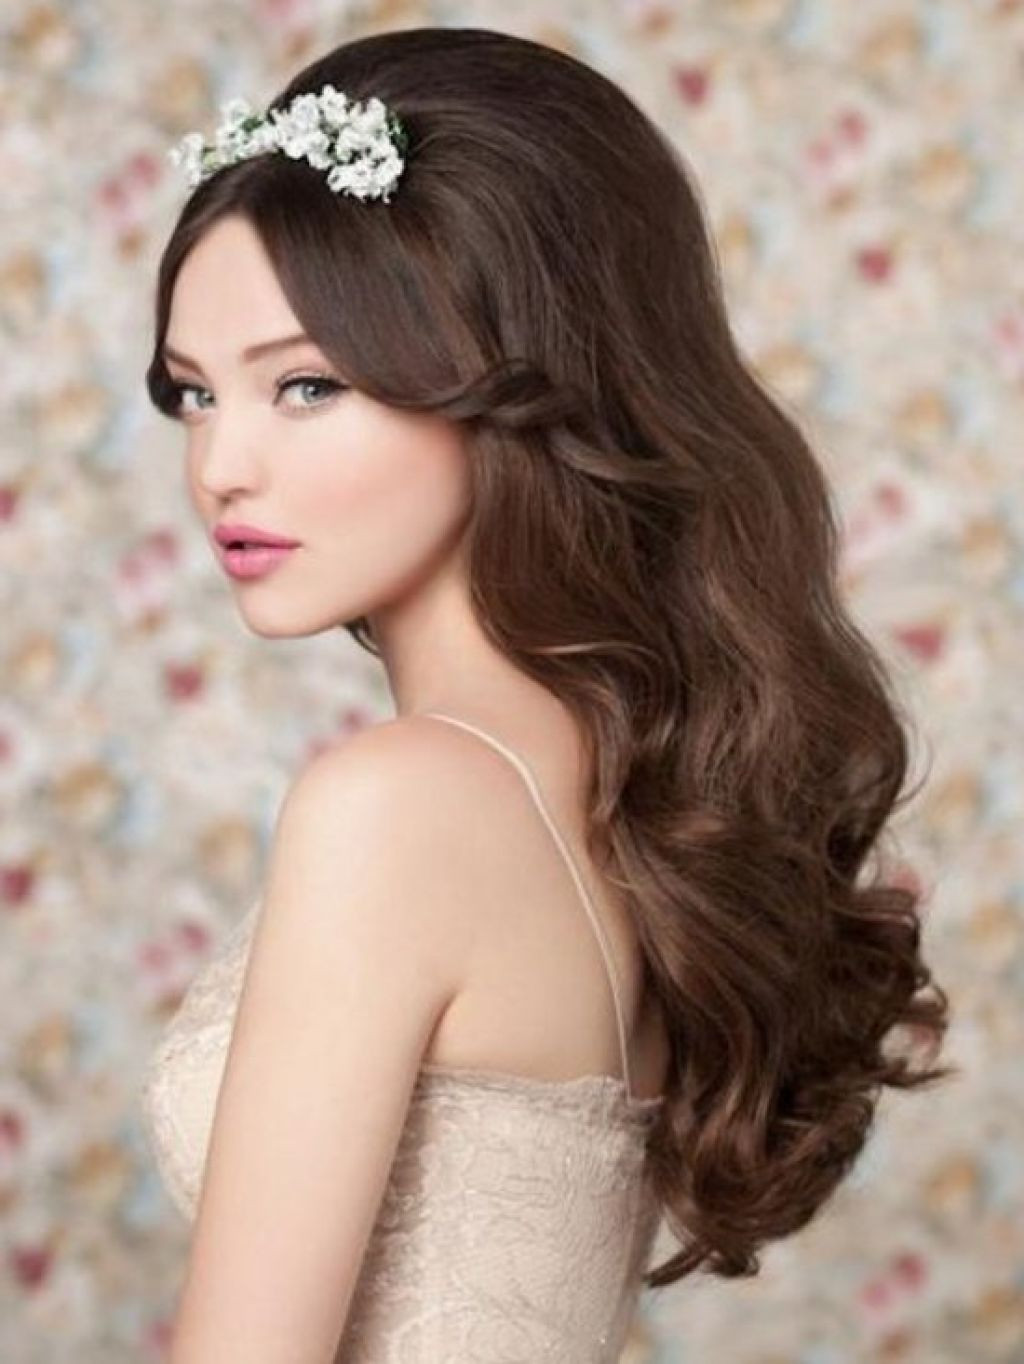 Vintage Hairstyle For Wedding
 20 Classic Wedding Hairstyles Long Hair MagMent